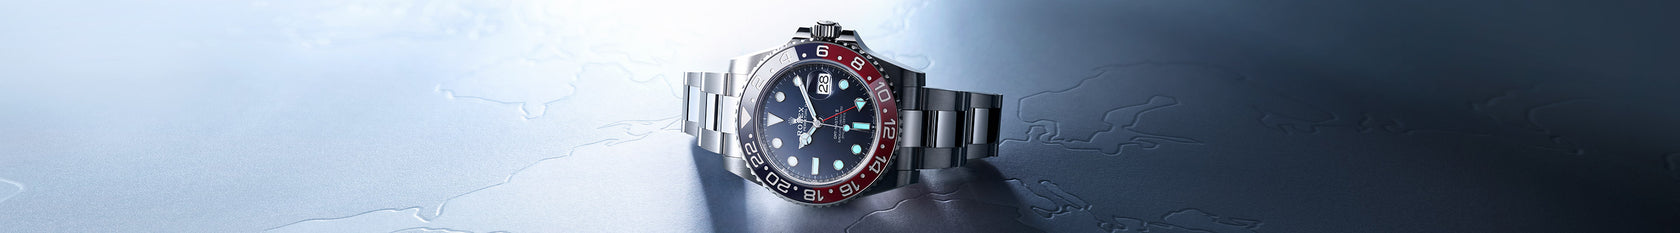 The Rolex GMT Master II in 18K white gold and a blue dial. This watch features a blue and red creamic disc for the bezel and the date feature at 3 o'clock. Model #126719BLRO.